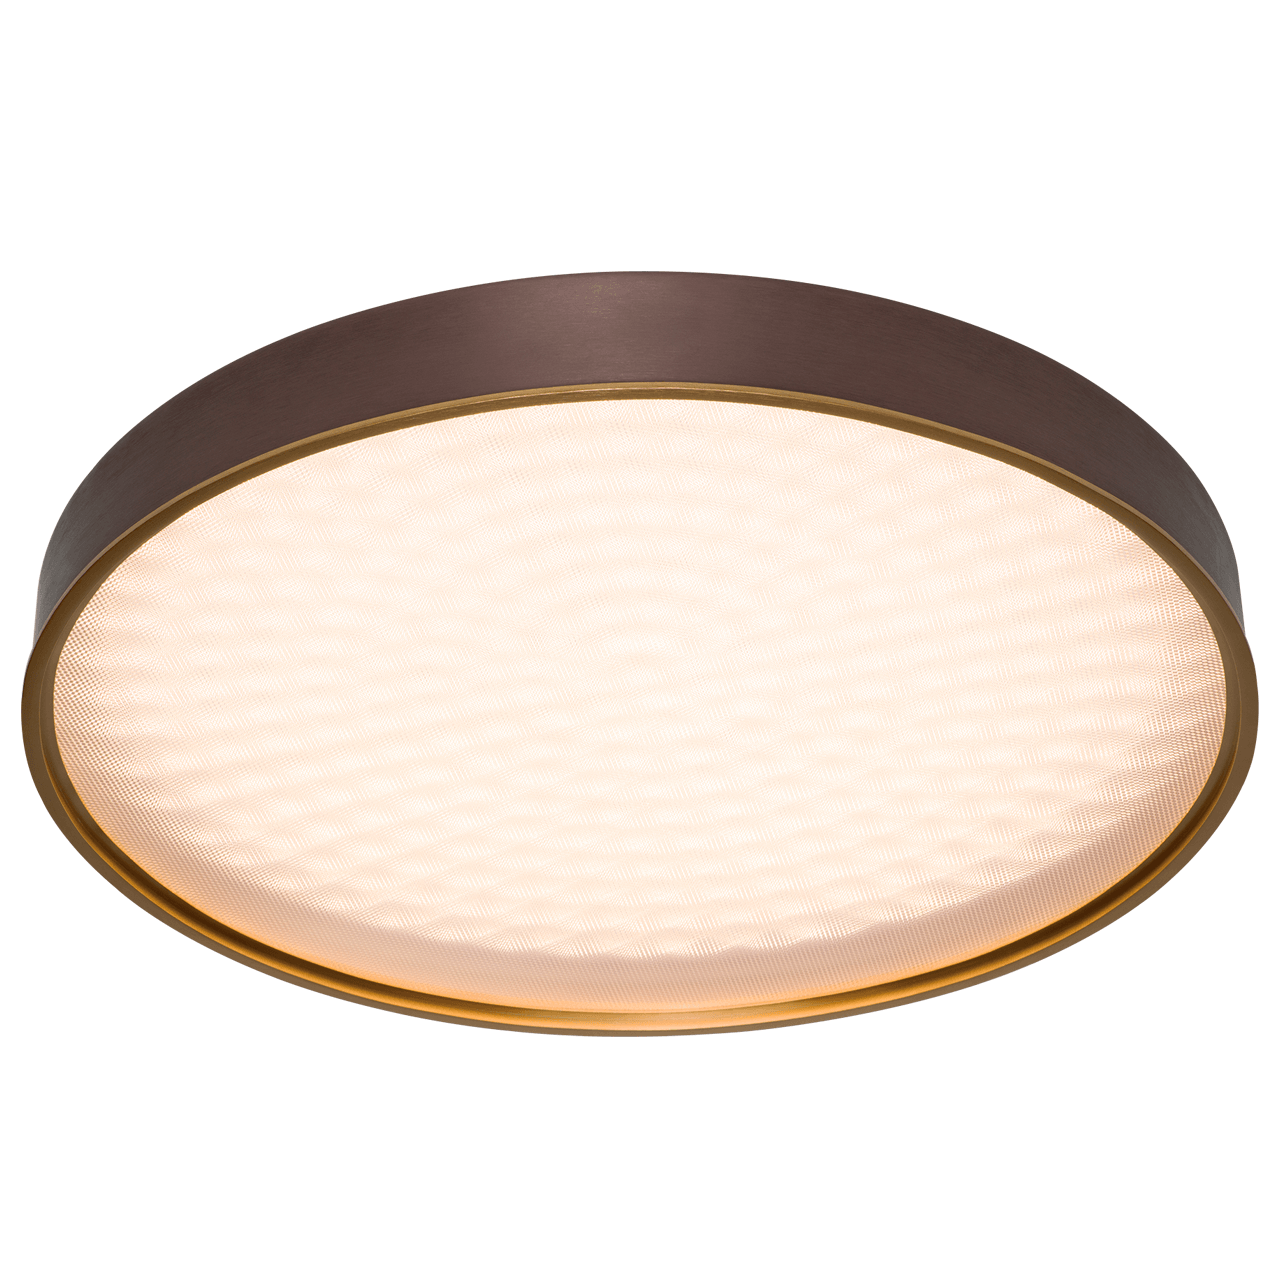 Pageone - Pan (Round L) 19.8". Ceiling. Flush Mount - Hbdepot